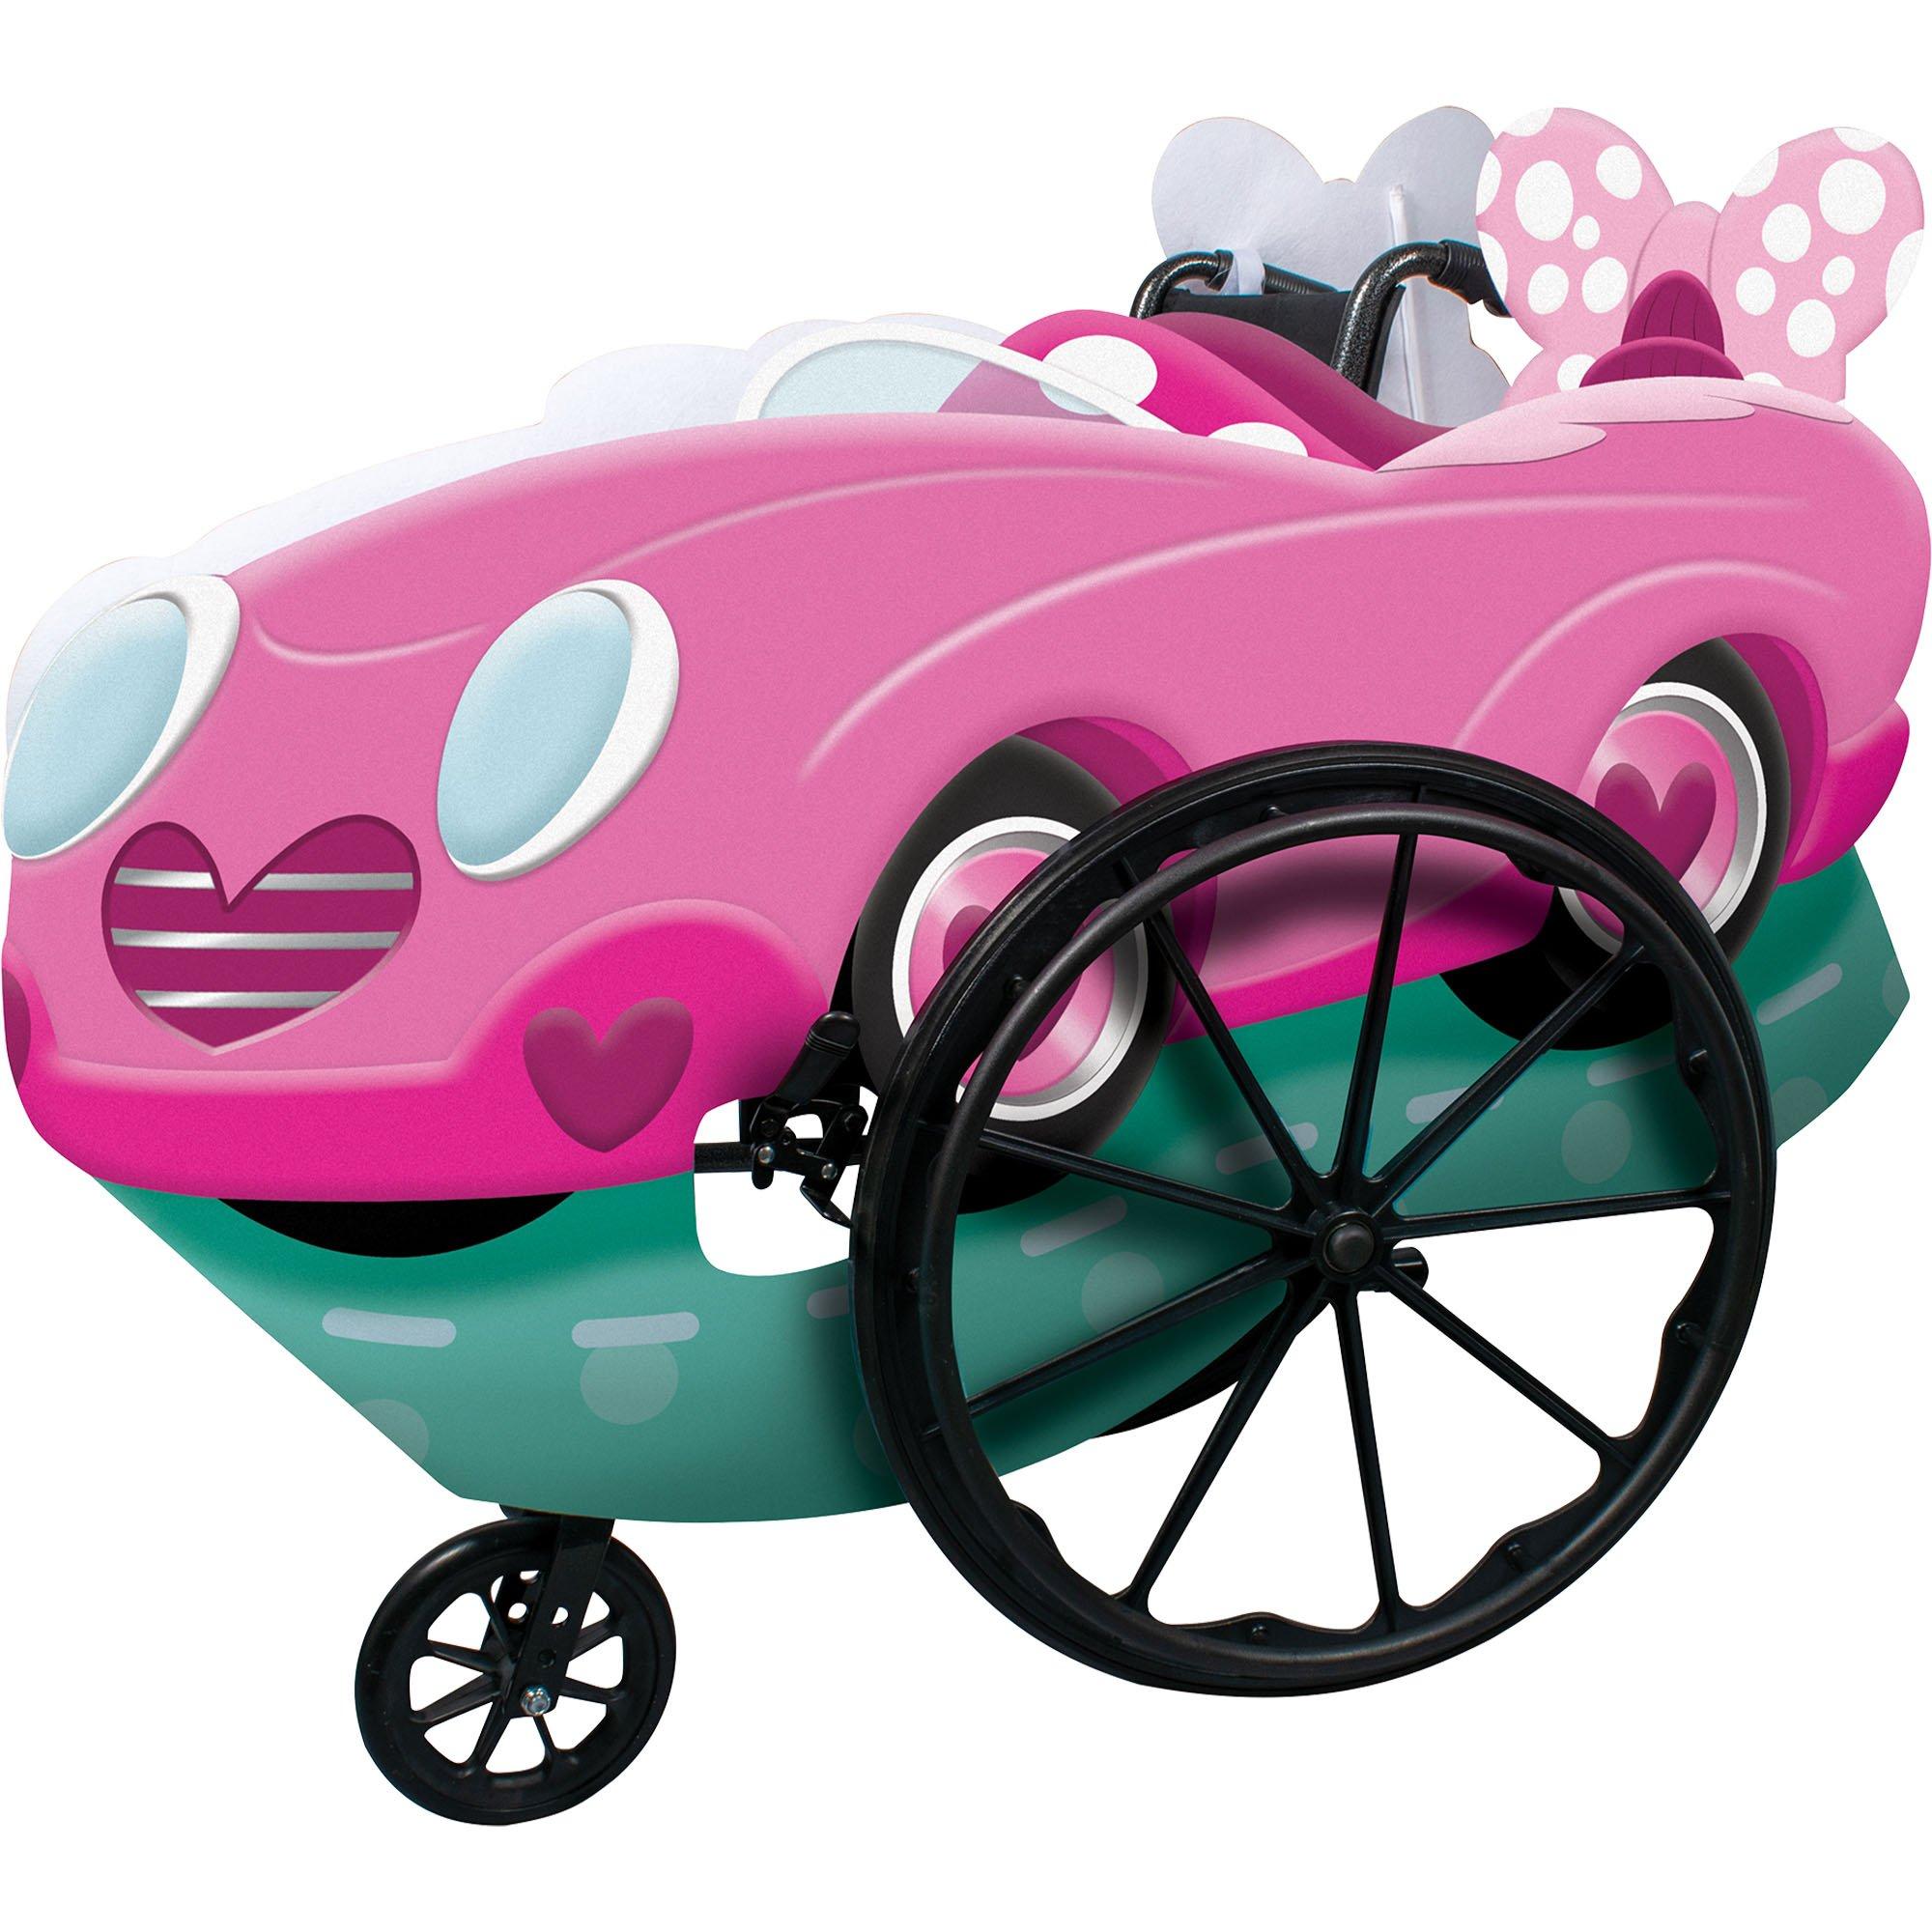 Pink Minnie Mouse Funhouse Wheelchair Costume